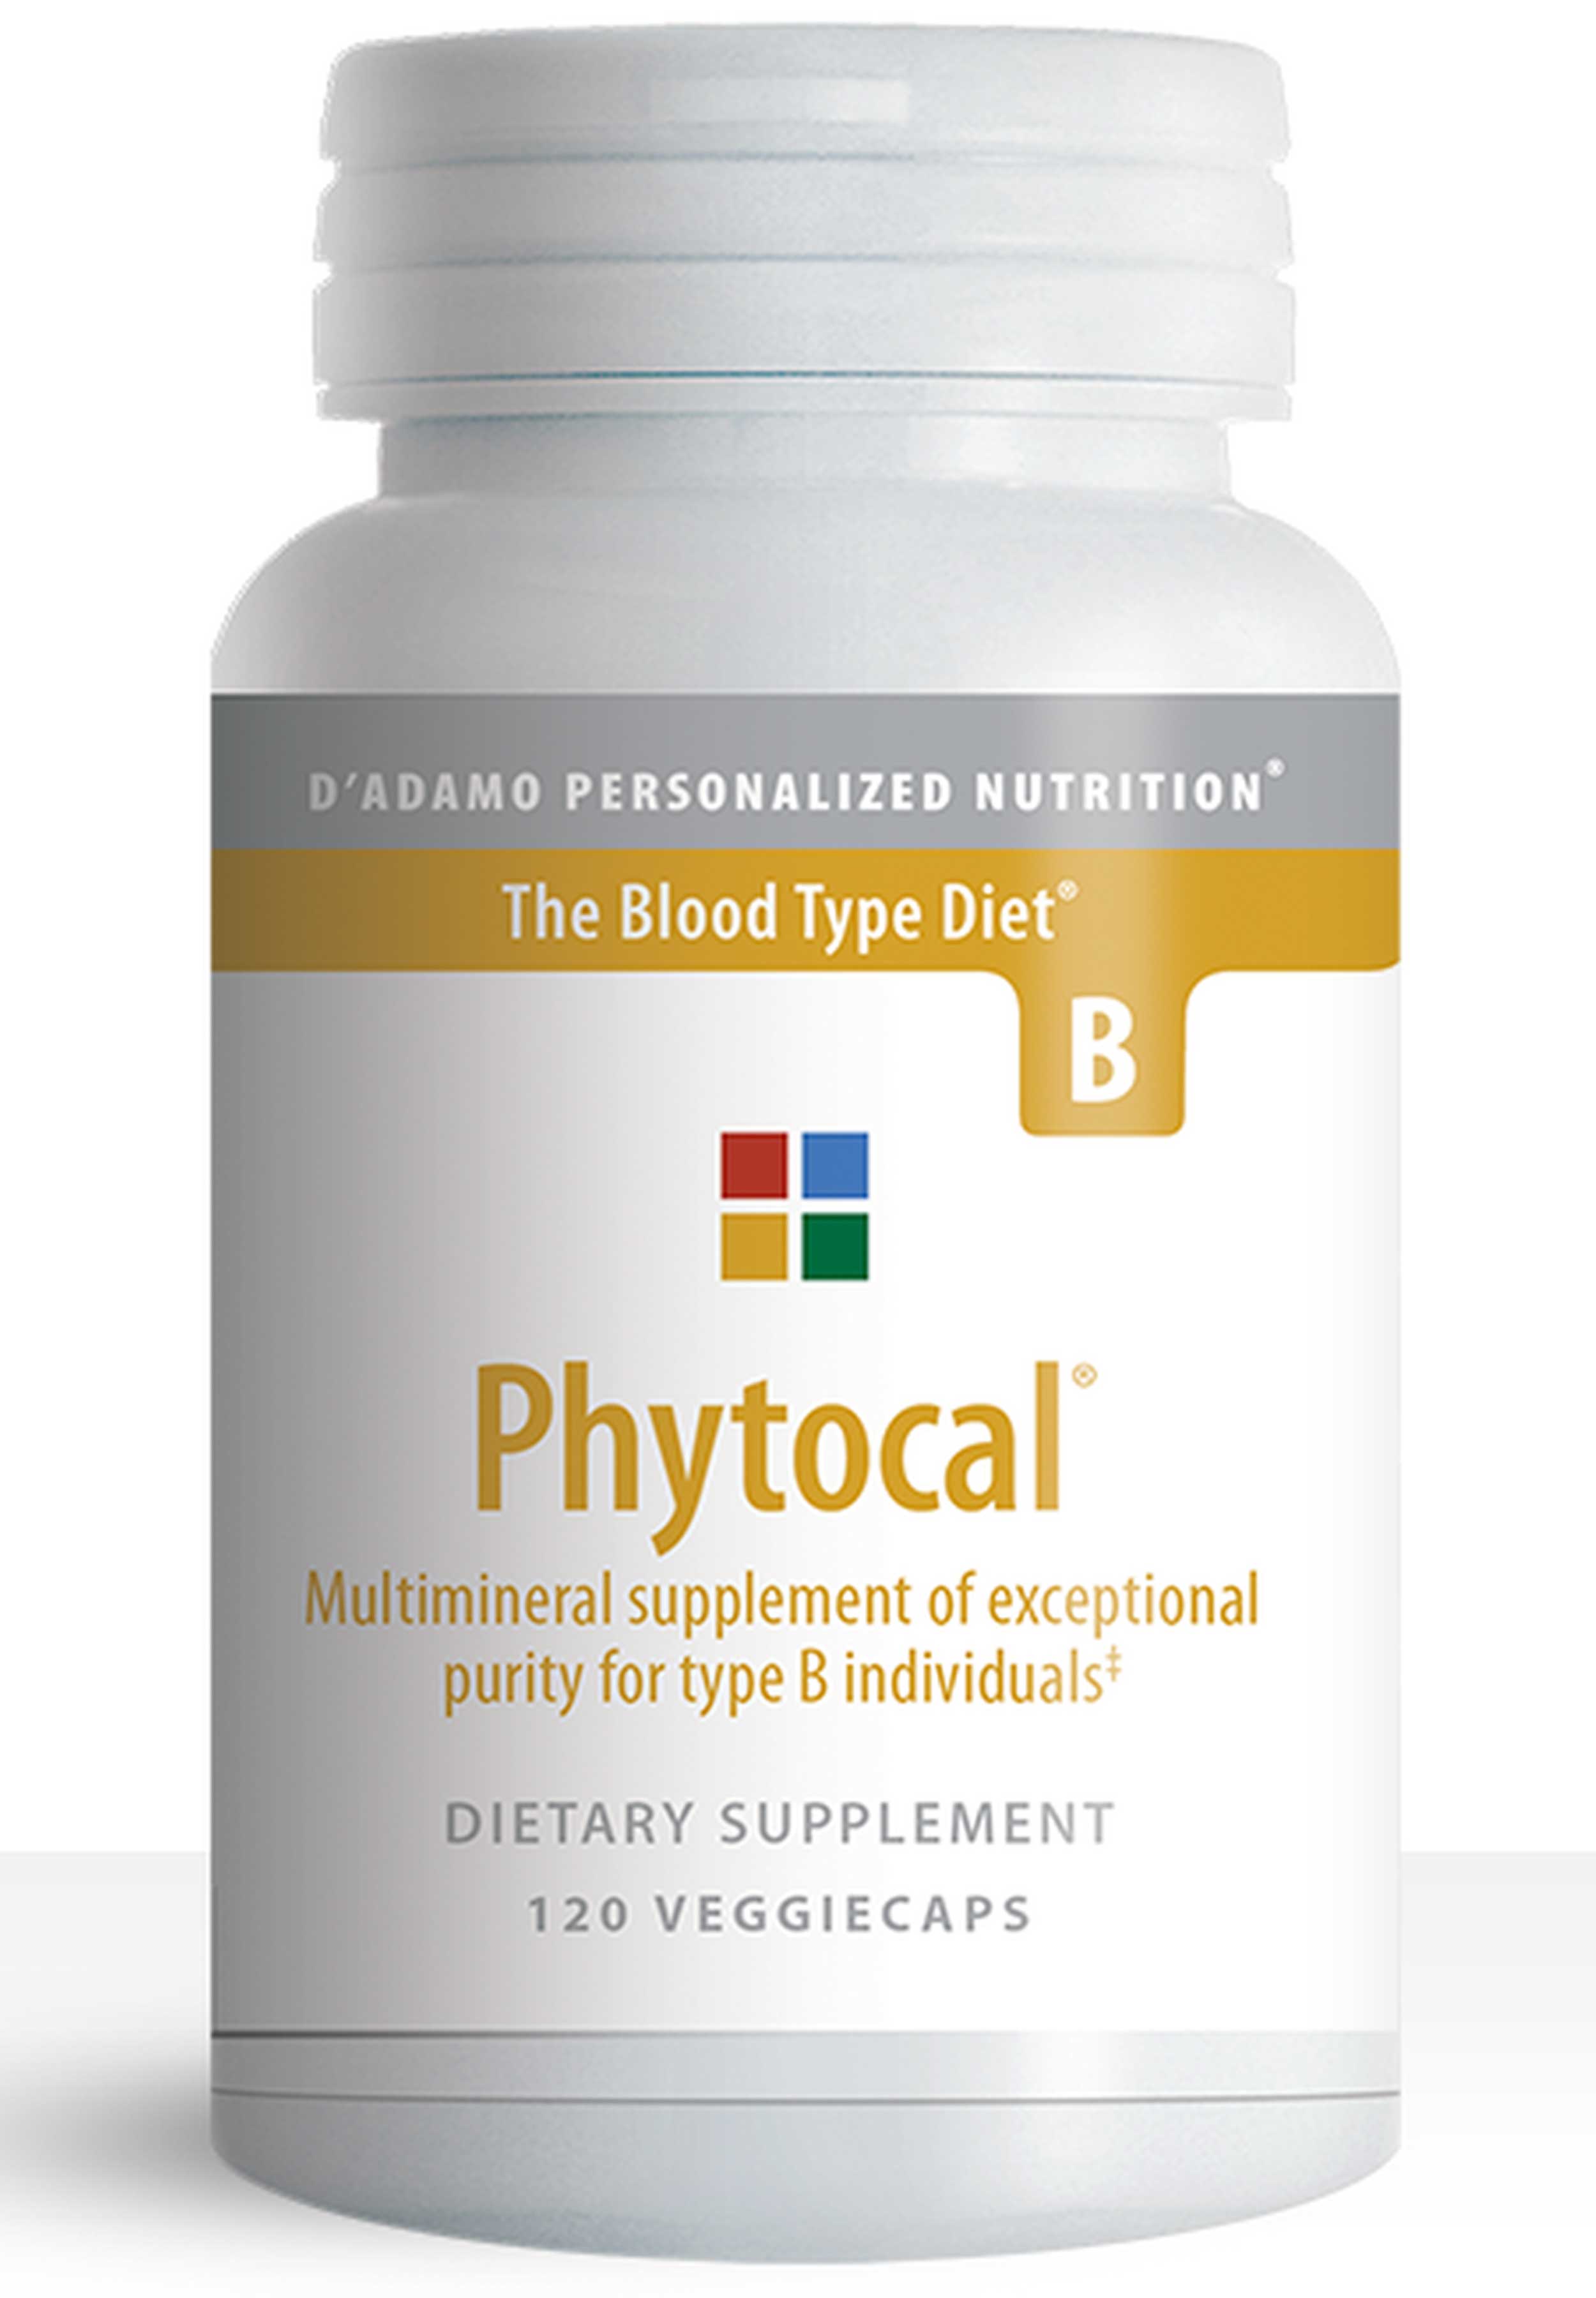 D'Adamo Personalized Nutrition Phytocal B 